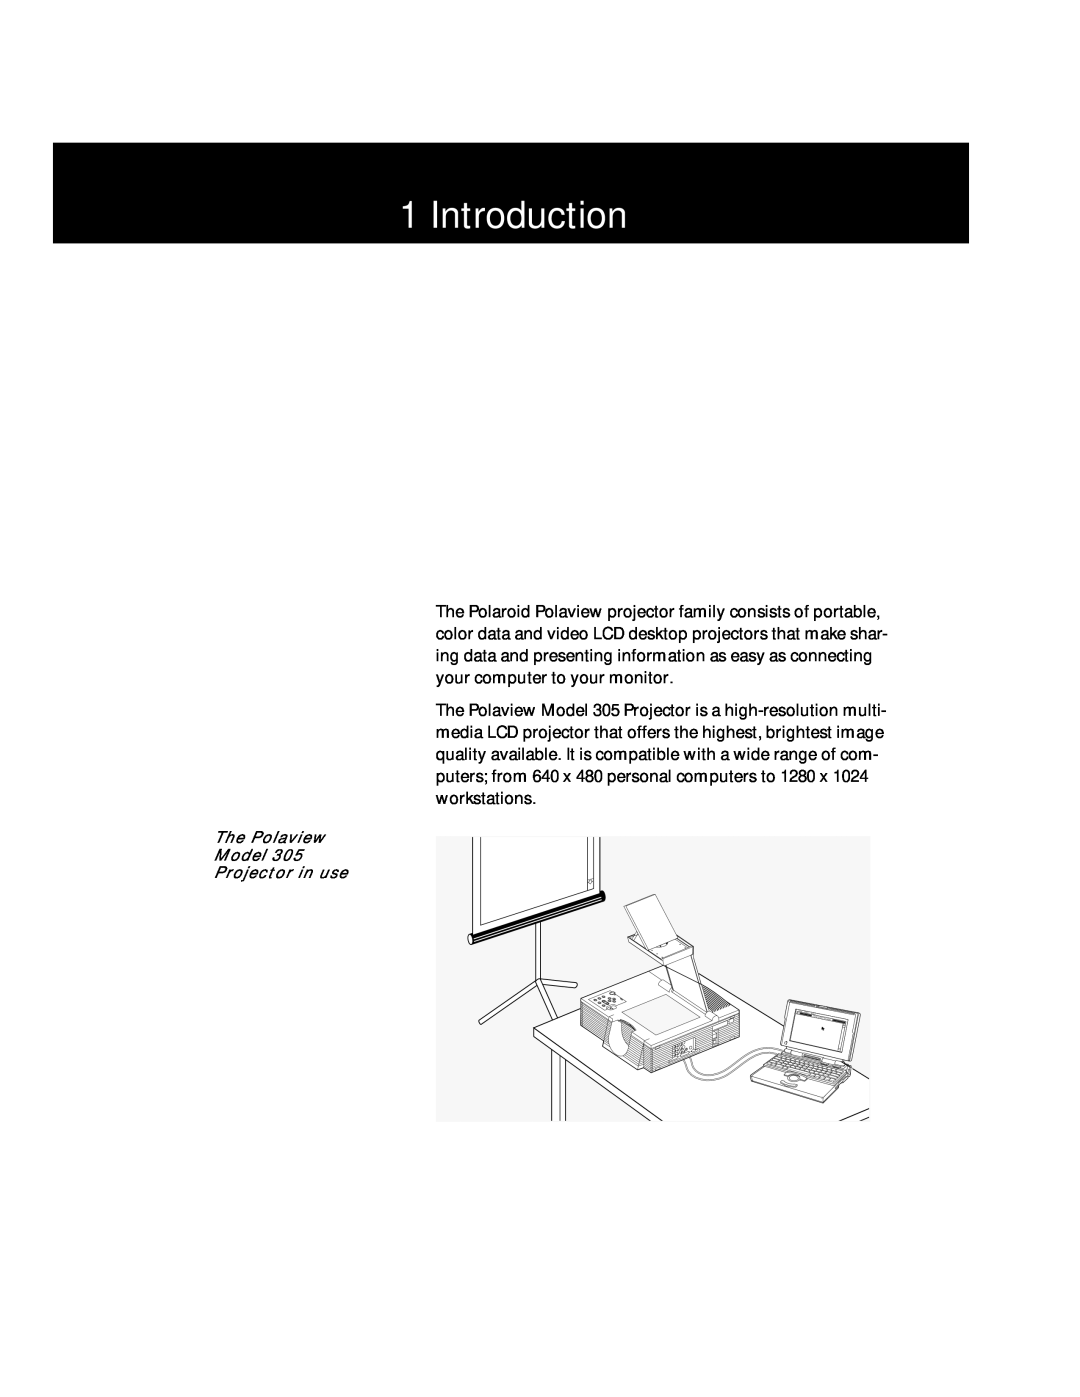 Polaroid Polaview 305 manual Introduction, The Polaview Model 305 Projector in use 